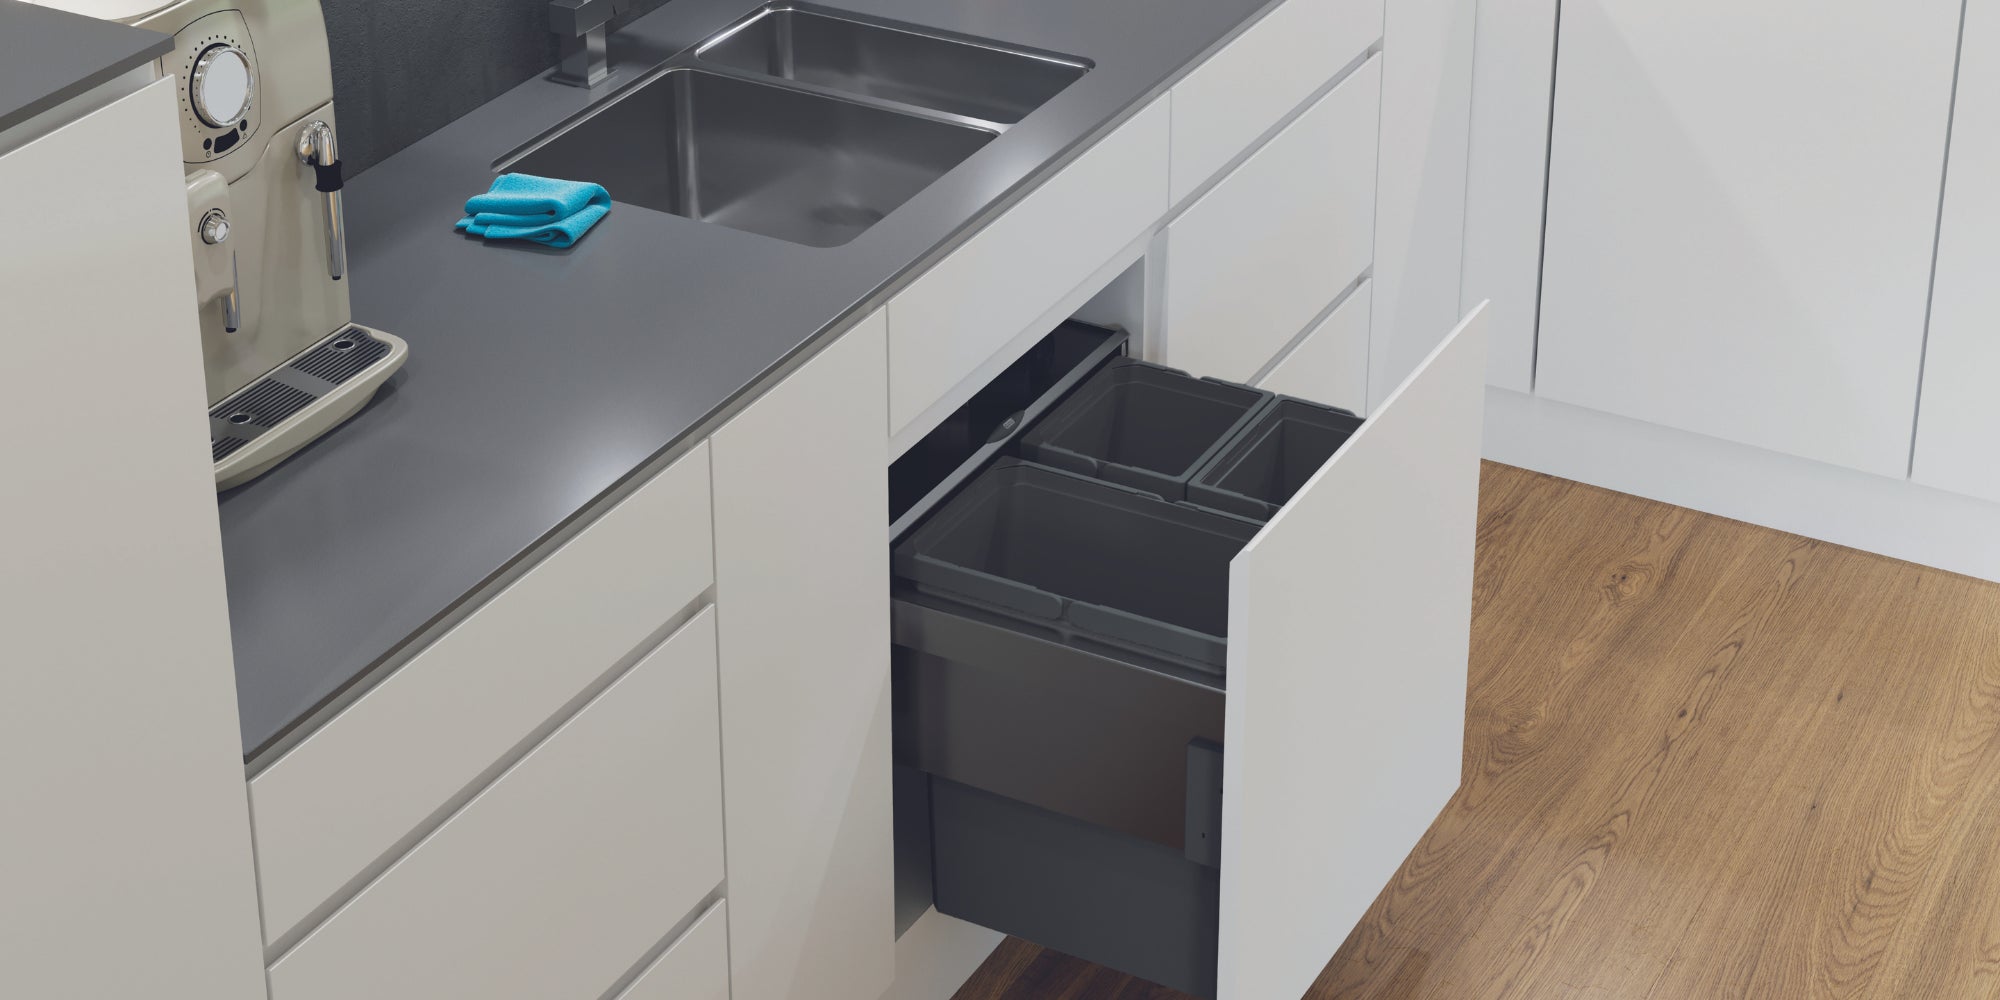 How to Install an In-Cupboard Kitchen Bin